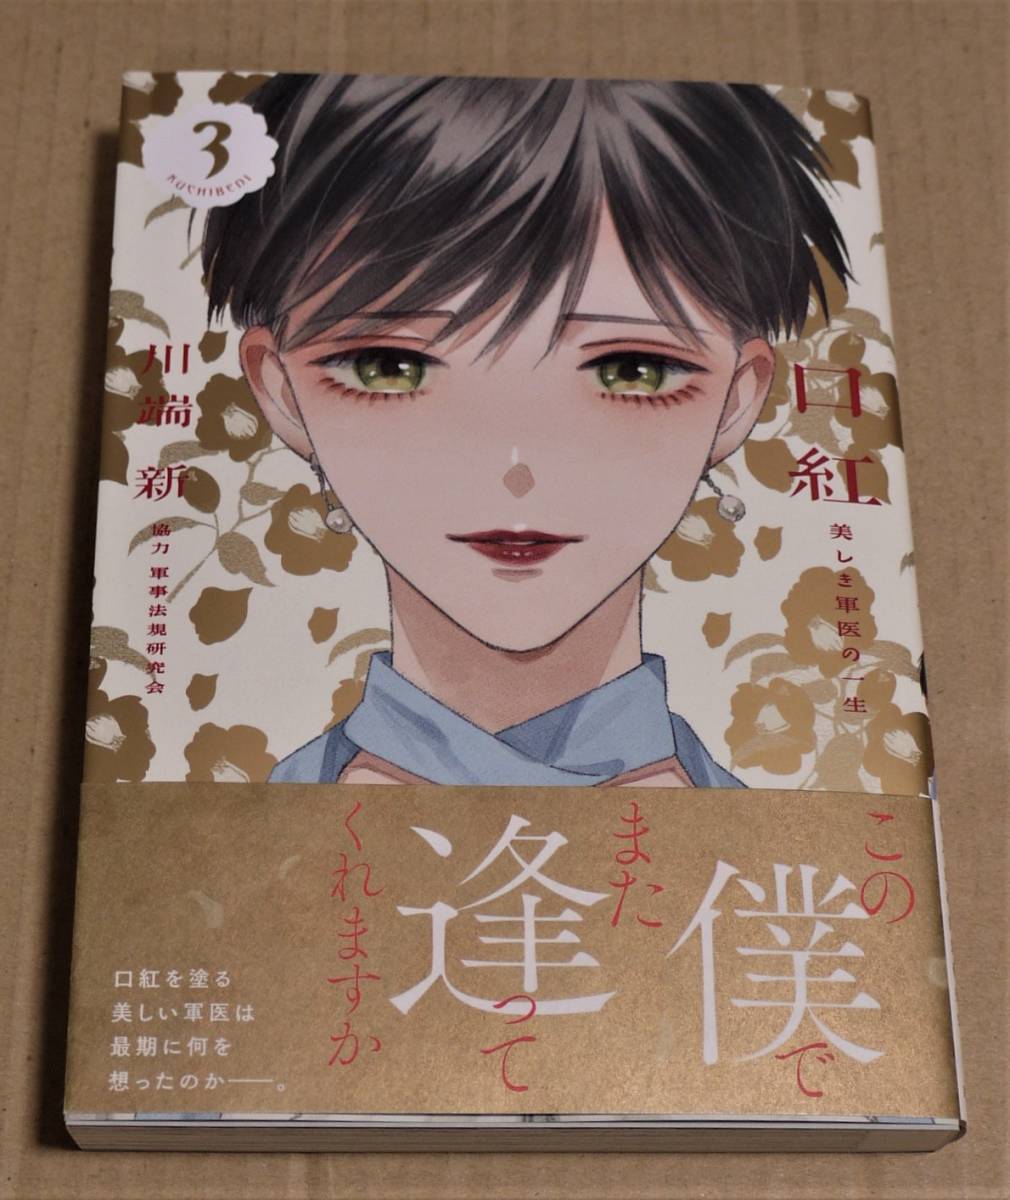 Hand-drawn illustrations and signature Lipstick: The Life of a Beautiful Military Surgeon Volume 3 (Arata Kawabata) Click Post shipping included, comics, anime goods, sign, Hand-drawn painting